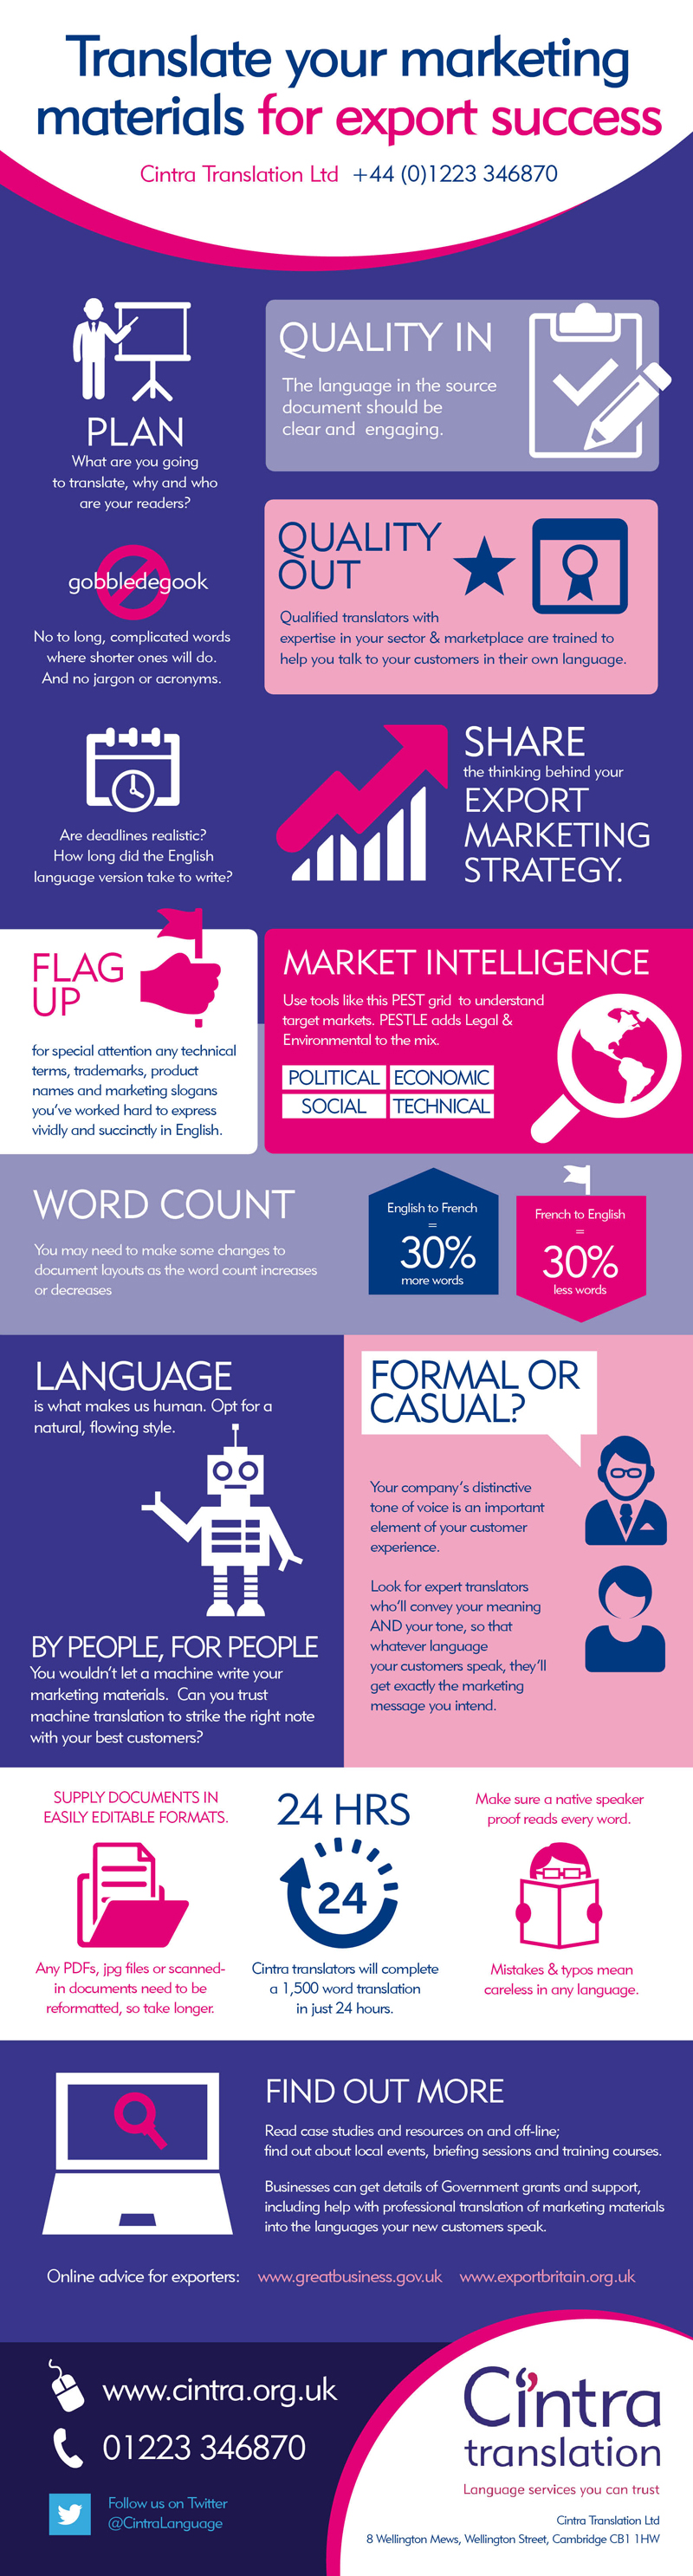 cintra-infographic-final Translate your marketing materials Jan 2015